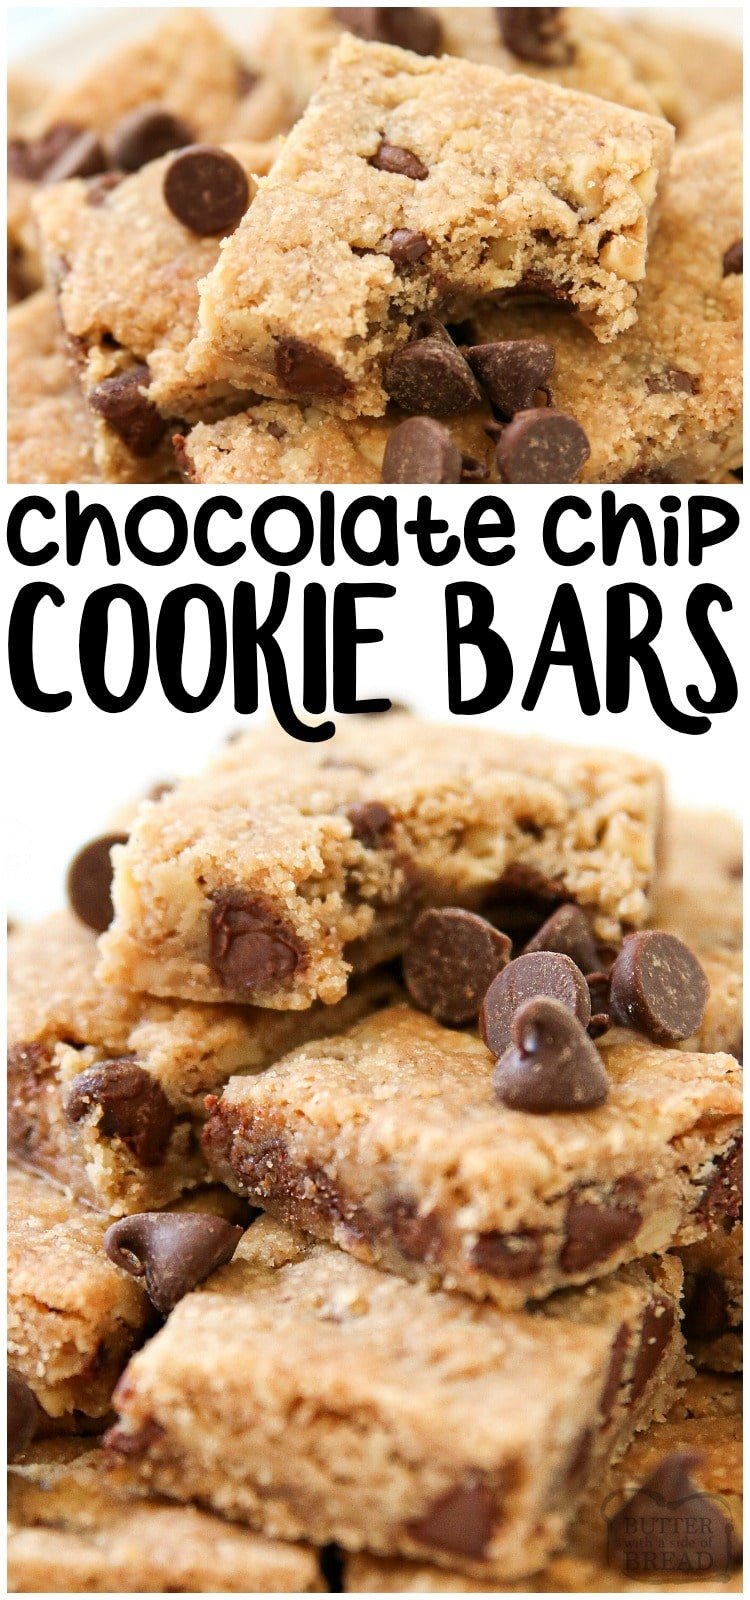 Easy Chocolate Chip Bars are the best chocolate chip cookie recipe made into a cookie bar recipe! This delicious treat is so easy, ready in 30 minutes, and is loved by everyone.